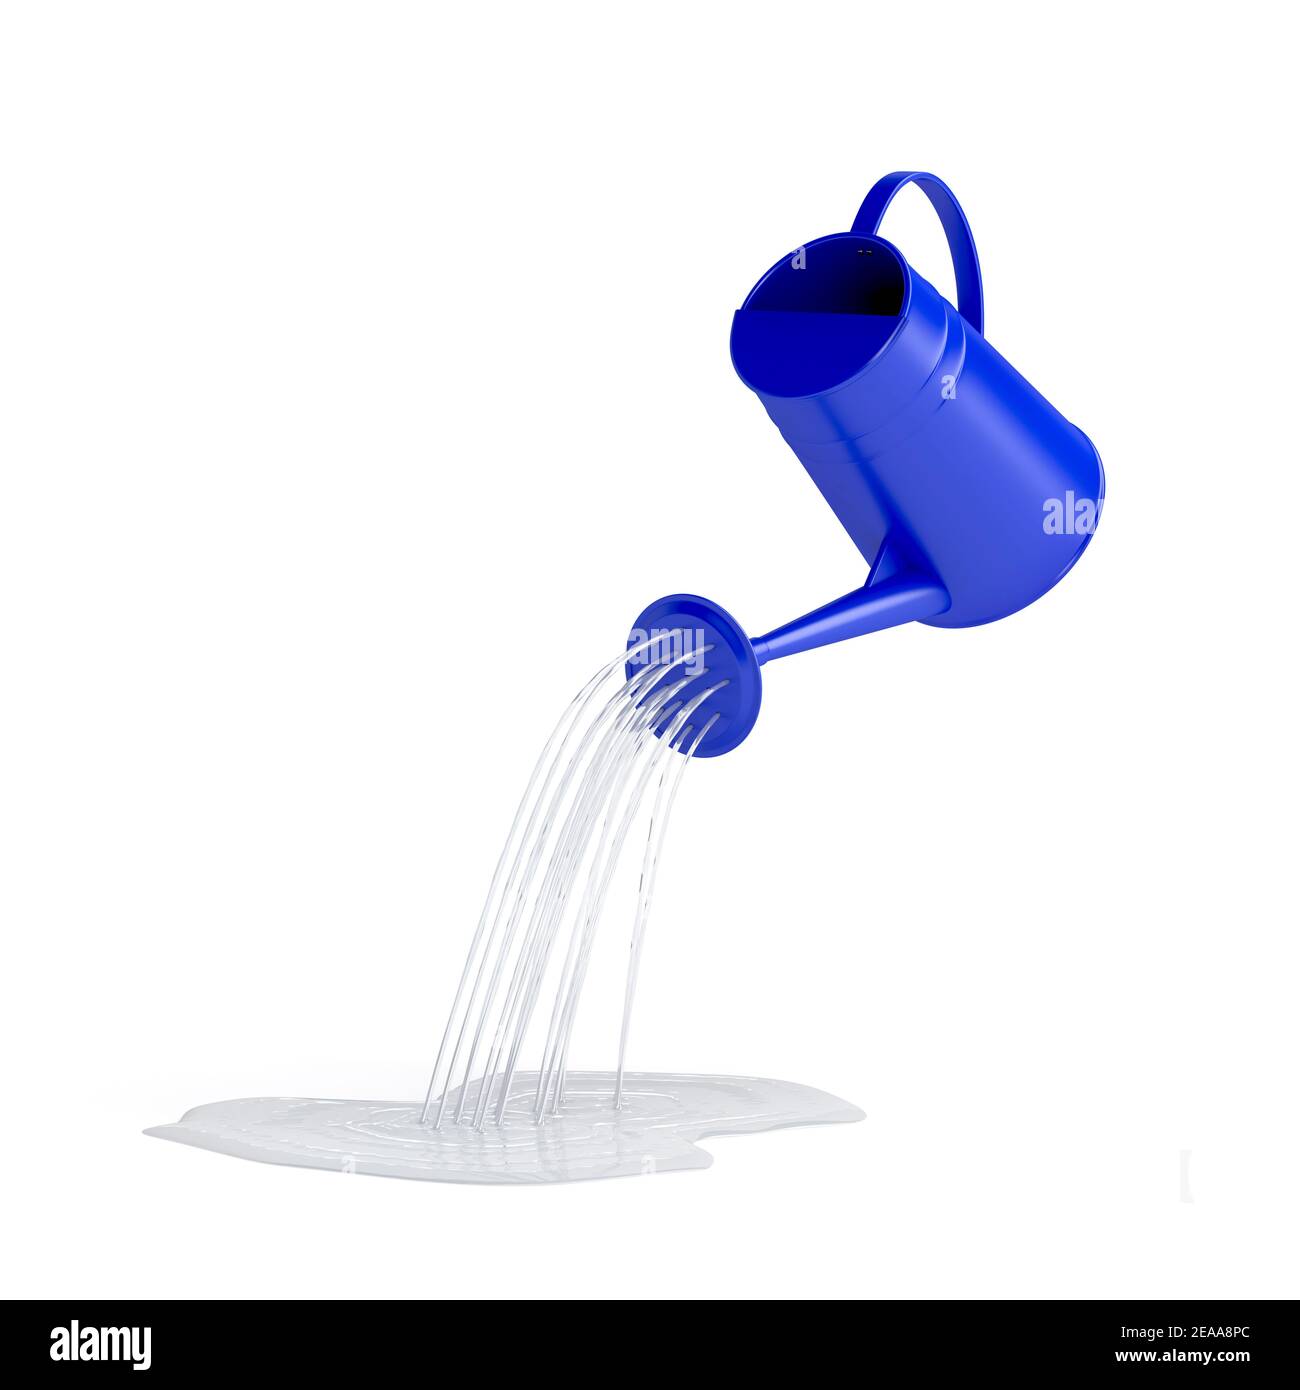 Drawing water by bucket Cut Out Stock Images & Pictures - Alamy